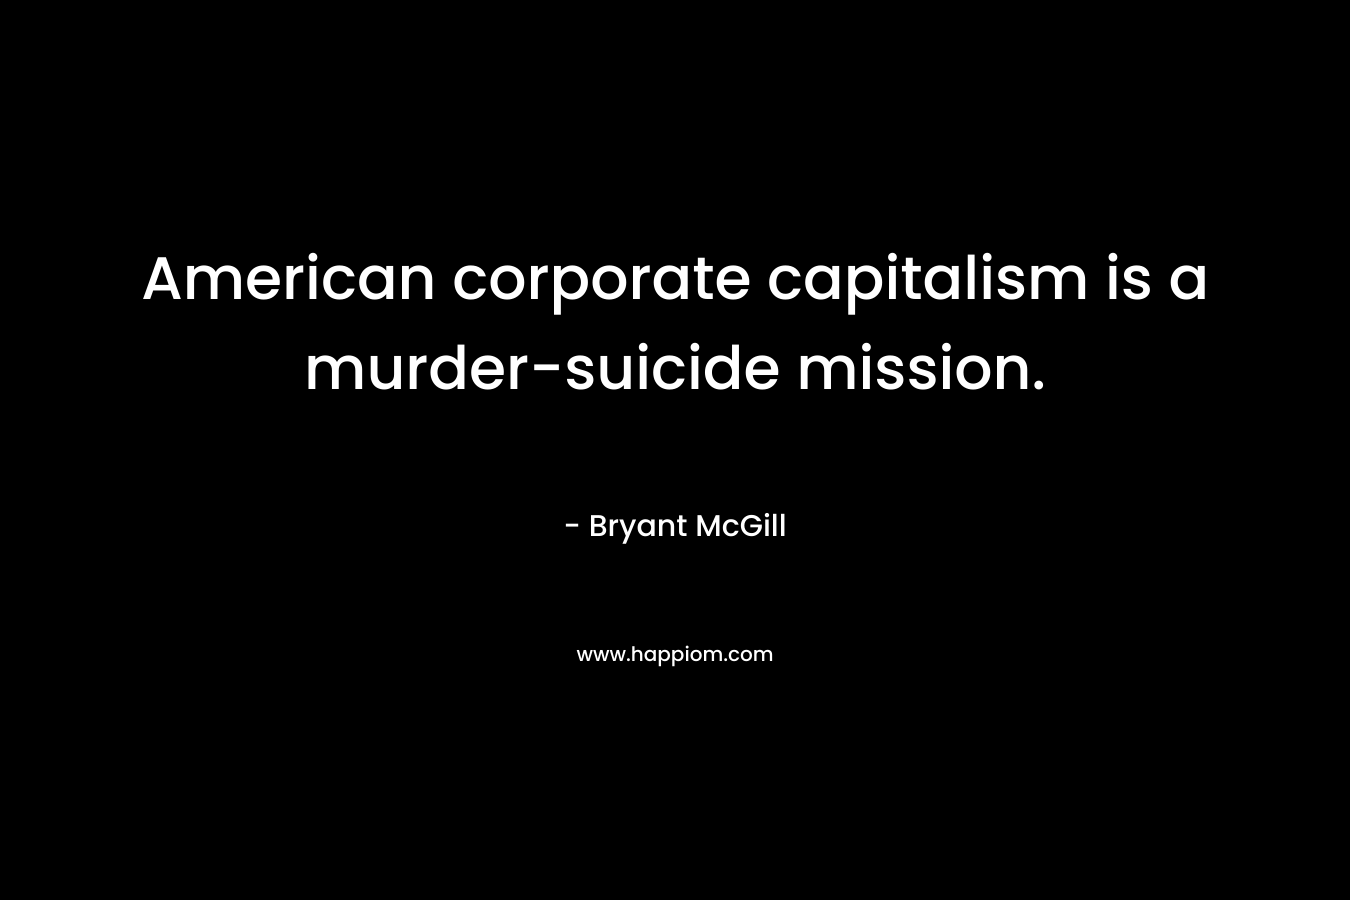 American corporate capitalism is a murder-suicide mission. – Bryant McGill